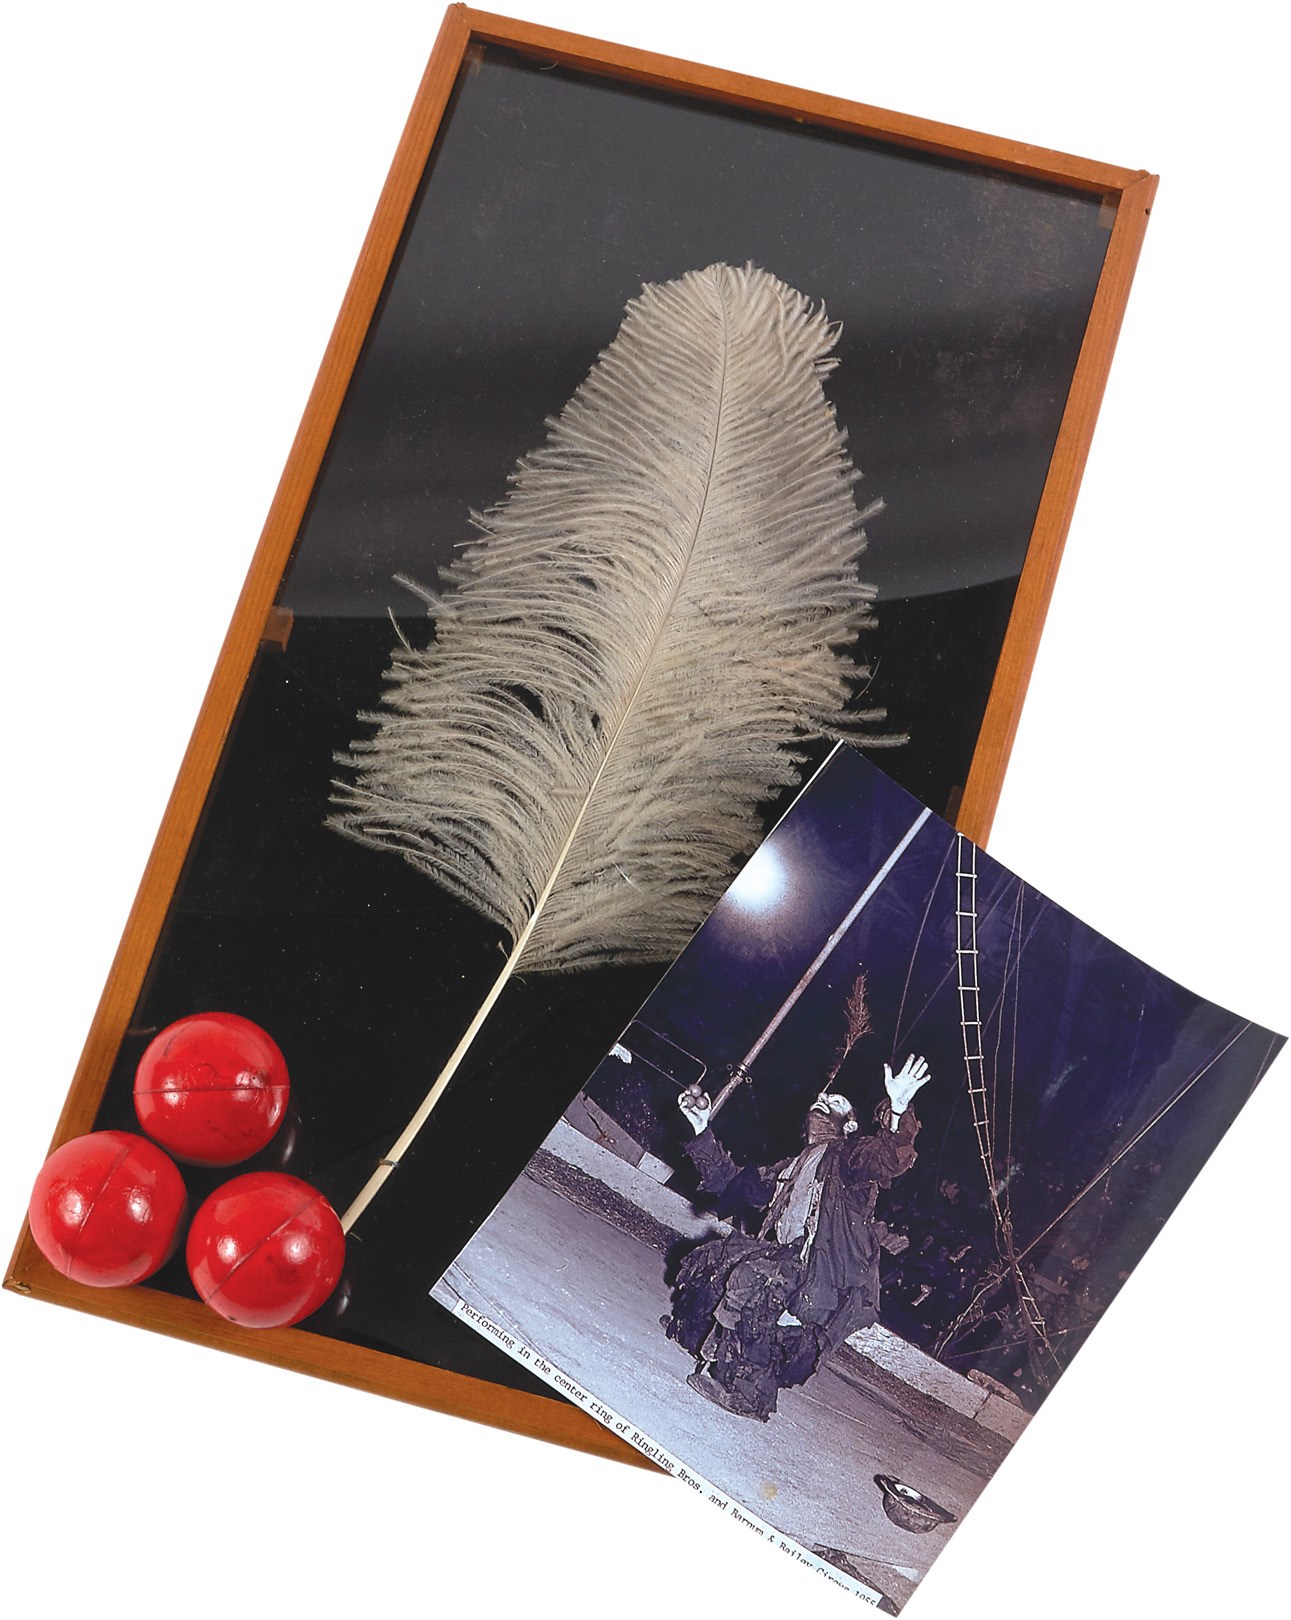 - The Feather & Juggling Balls from Emmett Kelly's "Feather Act"